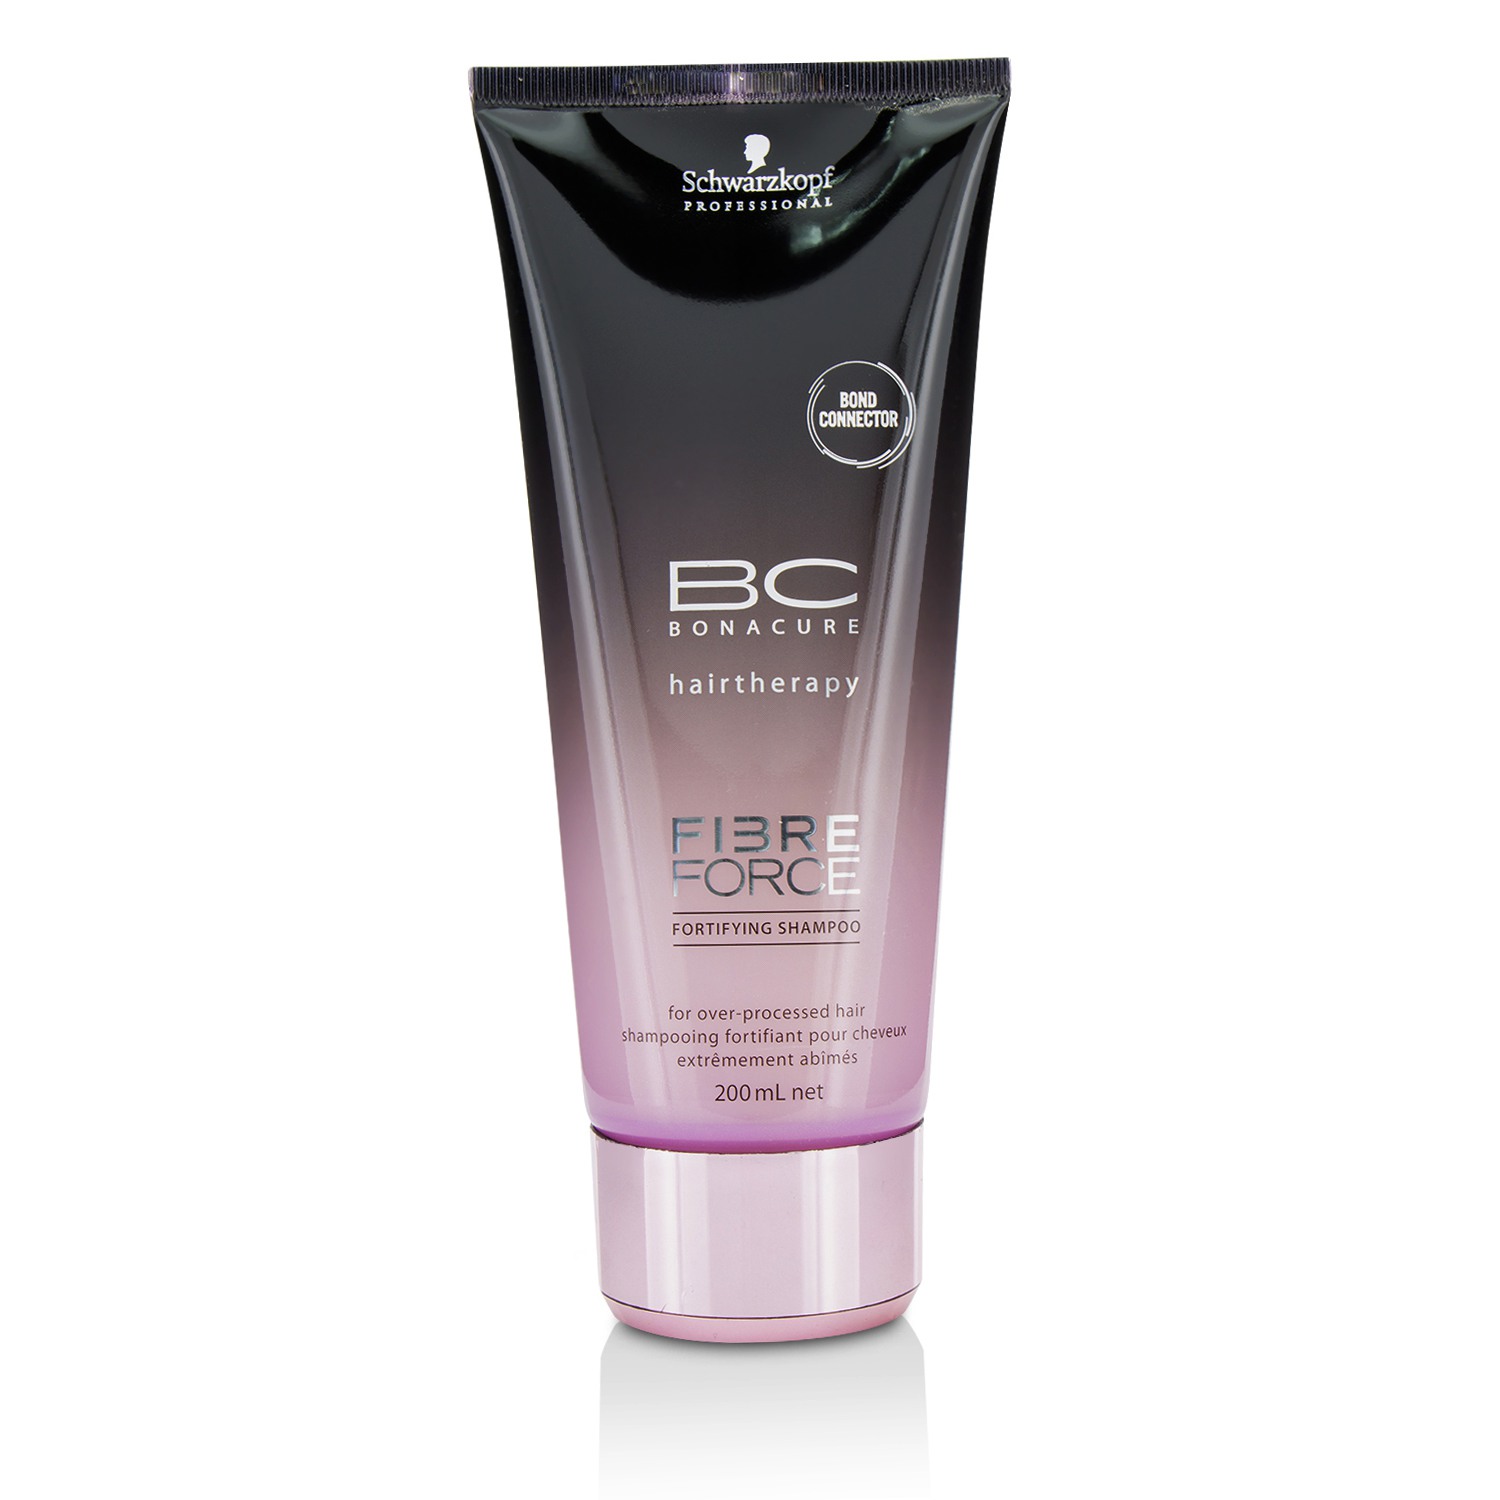 BC Fibre Force Fortifying Shampoo (For Over-Processed Hair) Schwarzkopf Image